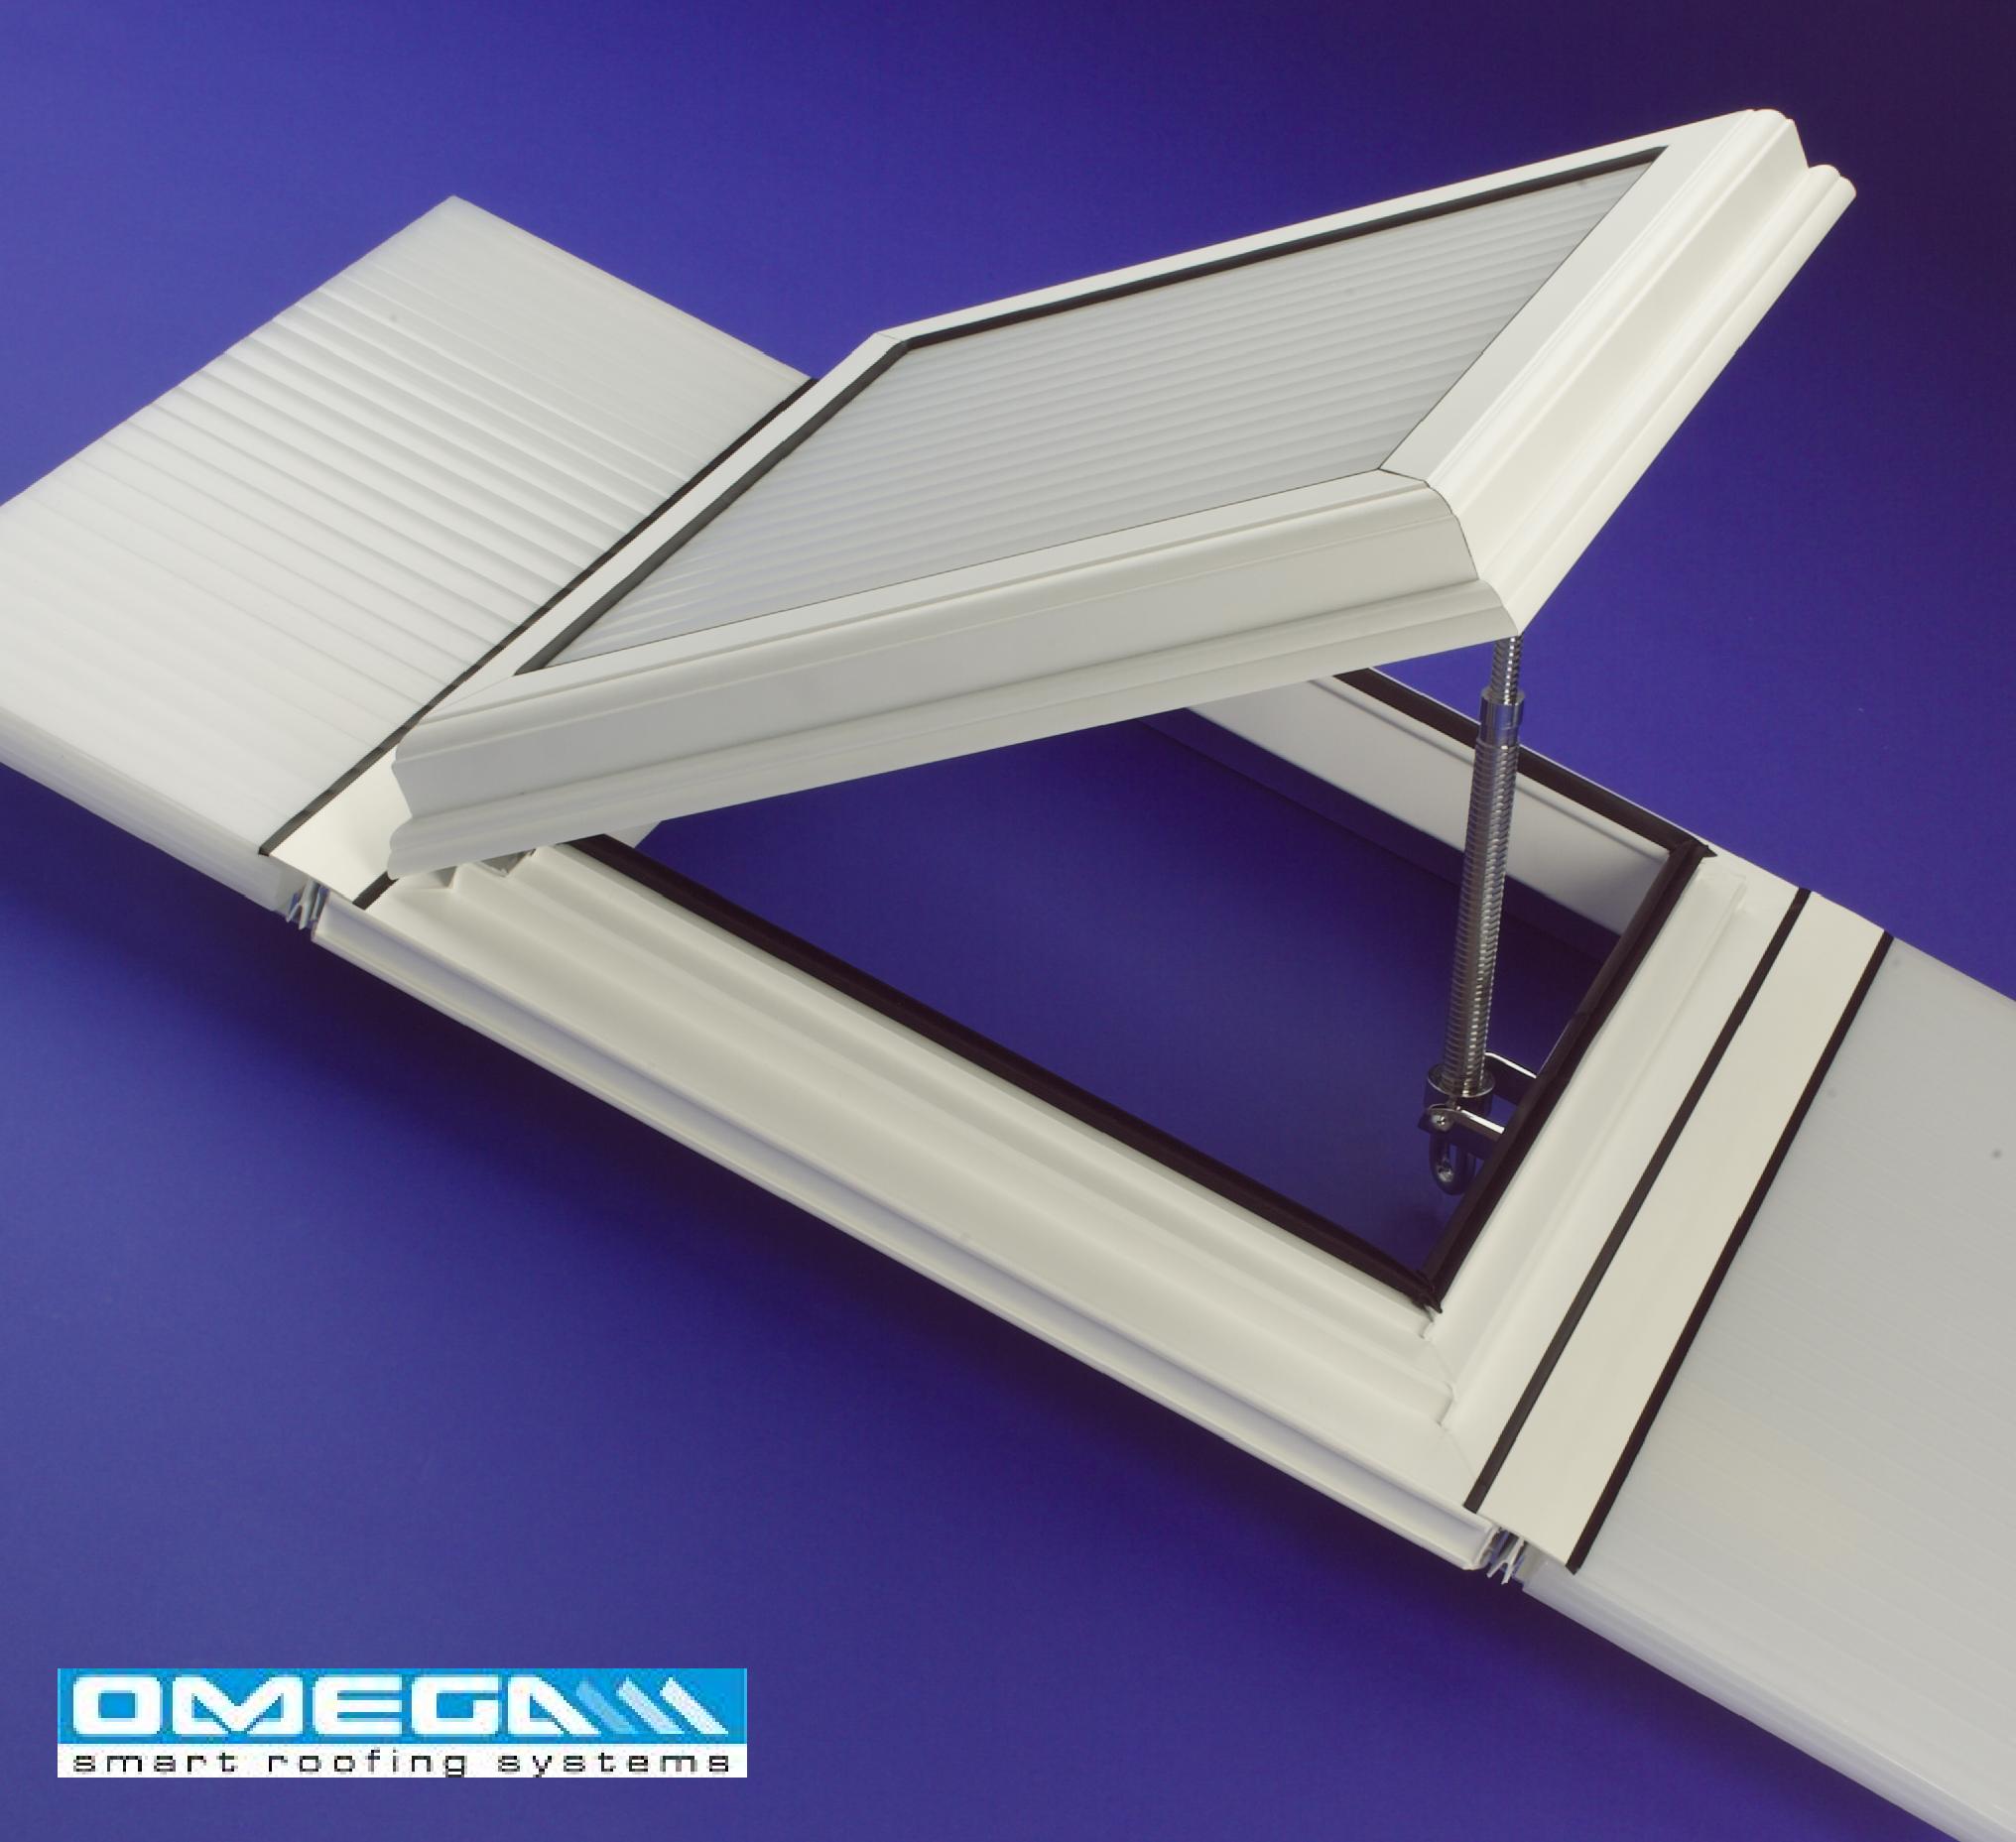 Aluminium/uPVC Conservatory Roof Vent (Bar-to-Bar) for 25mm thick polycarbonate